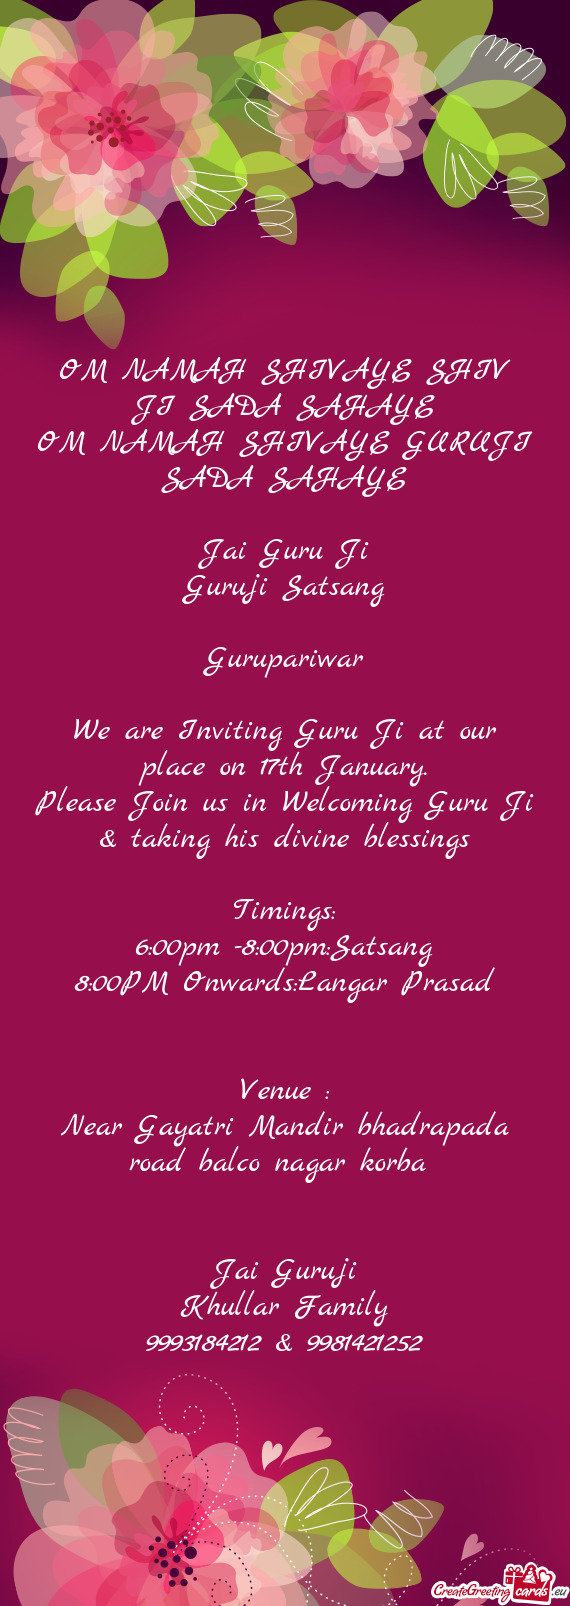 We are Inviting Guru Ji at our place on 17th January